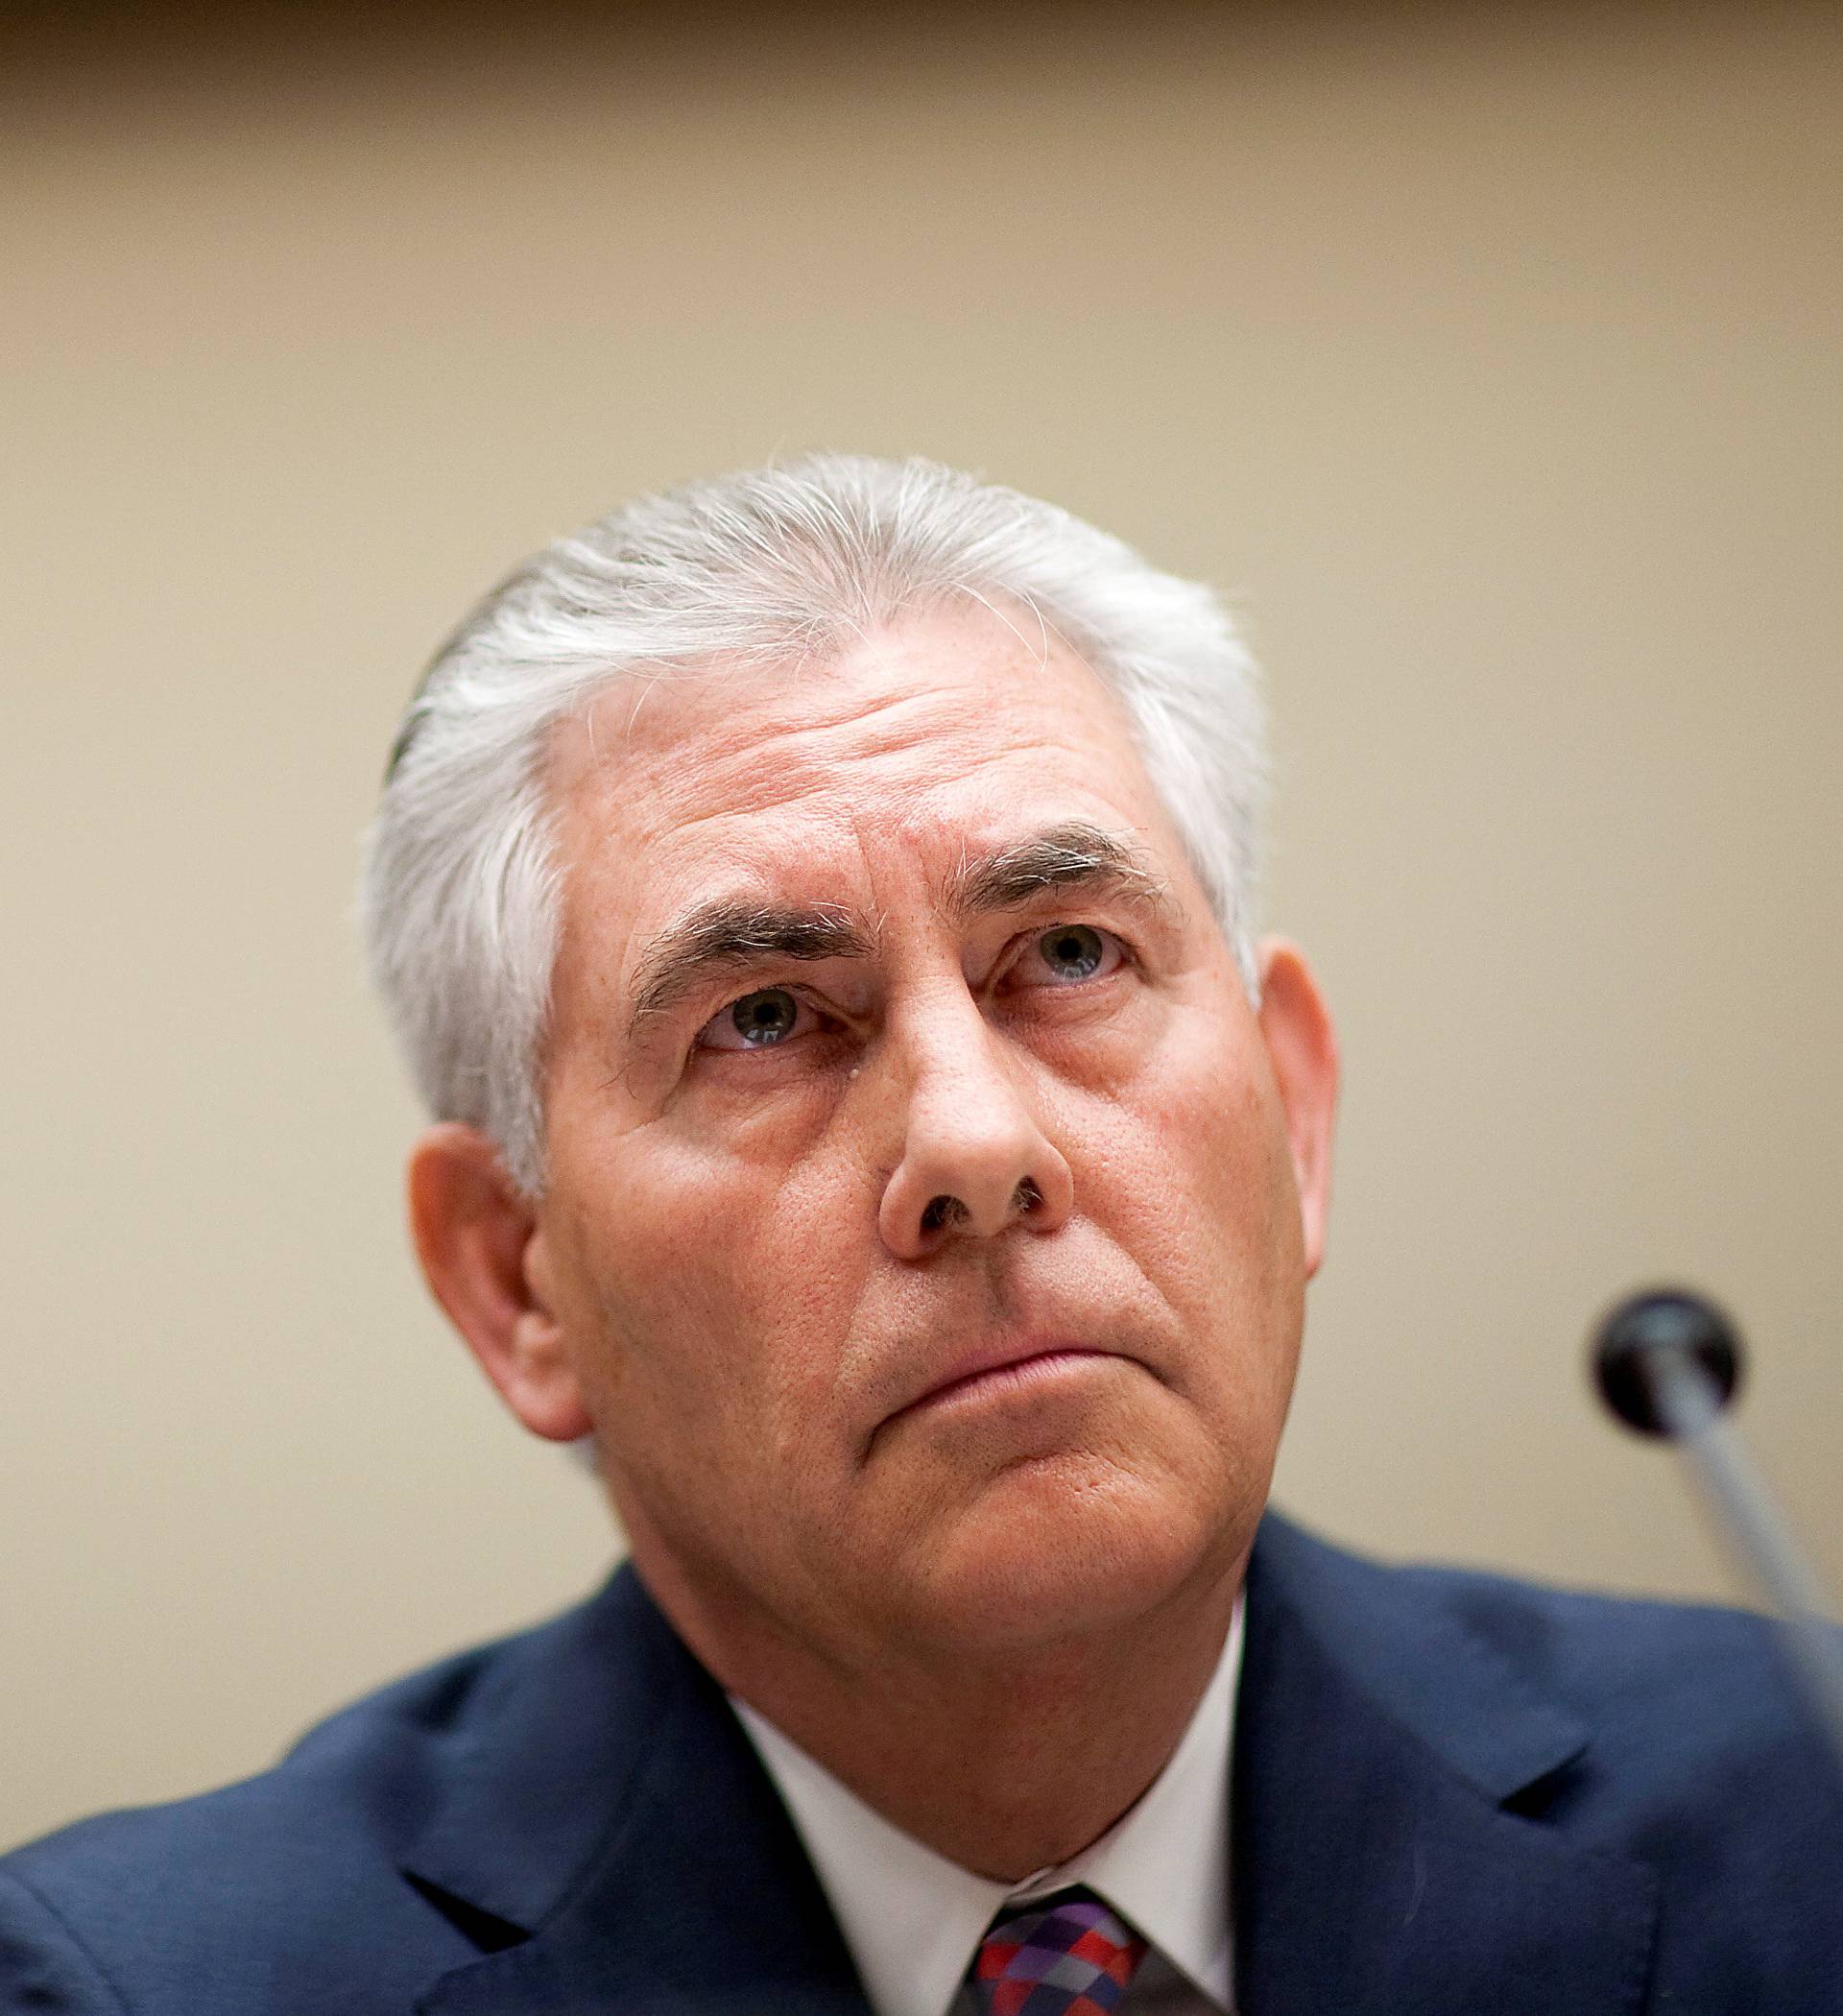 Tillerson, chairman and CEO of ExxonMobil, testifies about the company's acquisition of XTO Energy before the House Energy and Environment Subcommittee on Capitol Hill in Washington